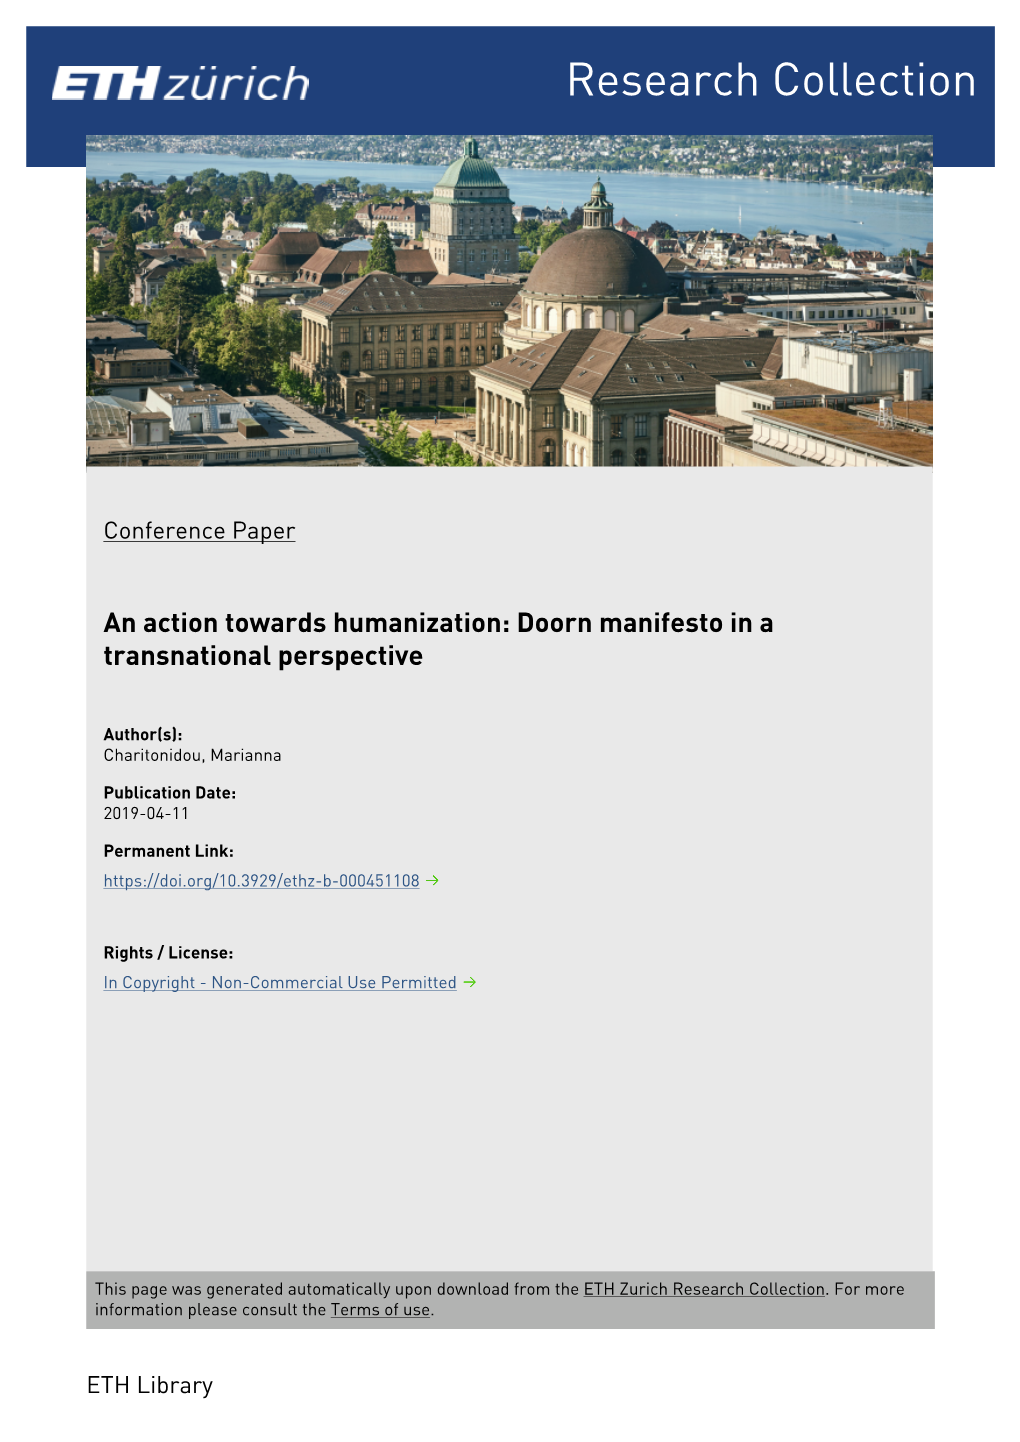 An Action Towards Humanization: Doorn Manifesto in a Transnational Perspective